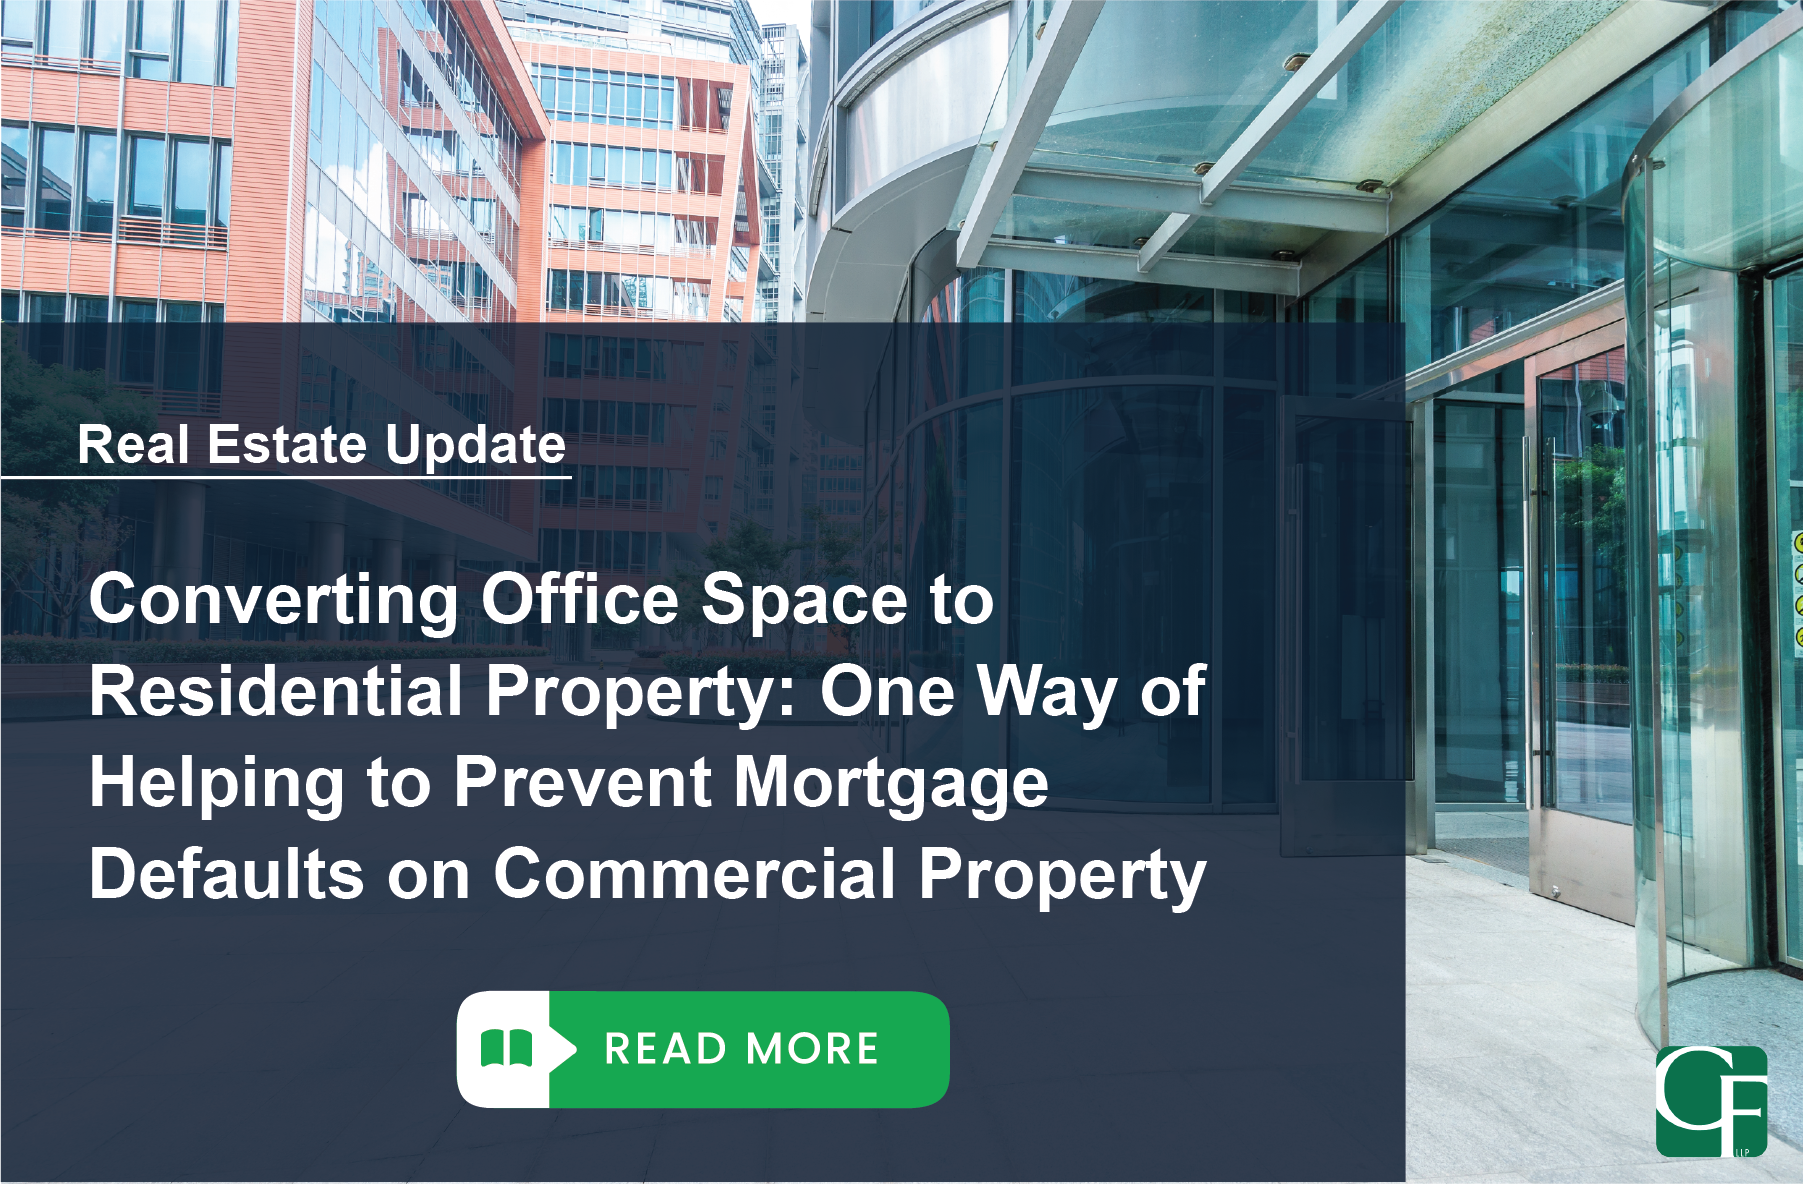 Converting Office Space to Residential Property: One Way of Helping to Prevent Mortgage Defaults on Commercial Property